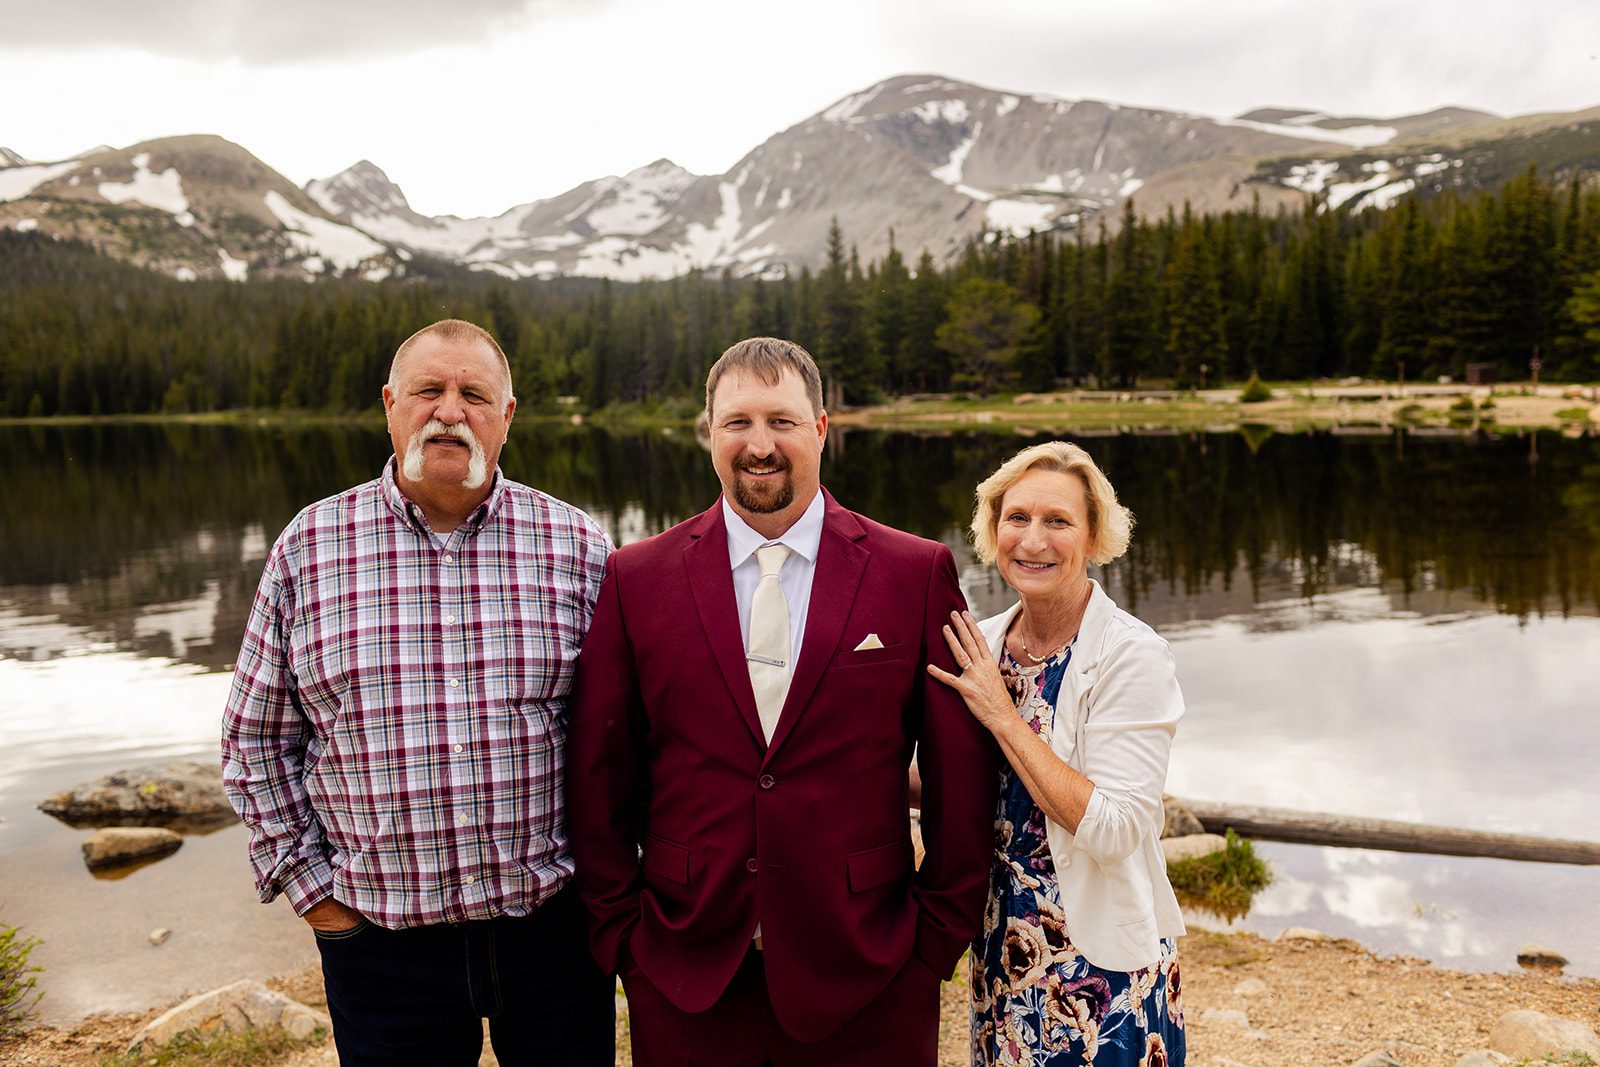 The groom and his parents at Brainard Lake.